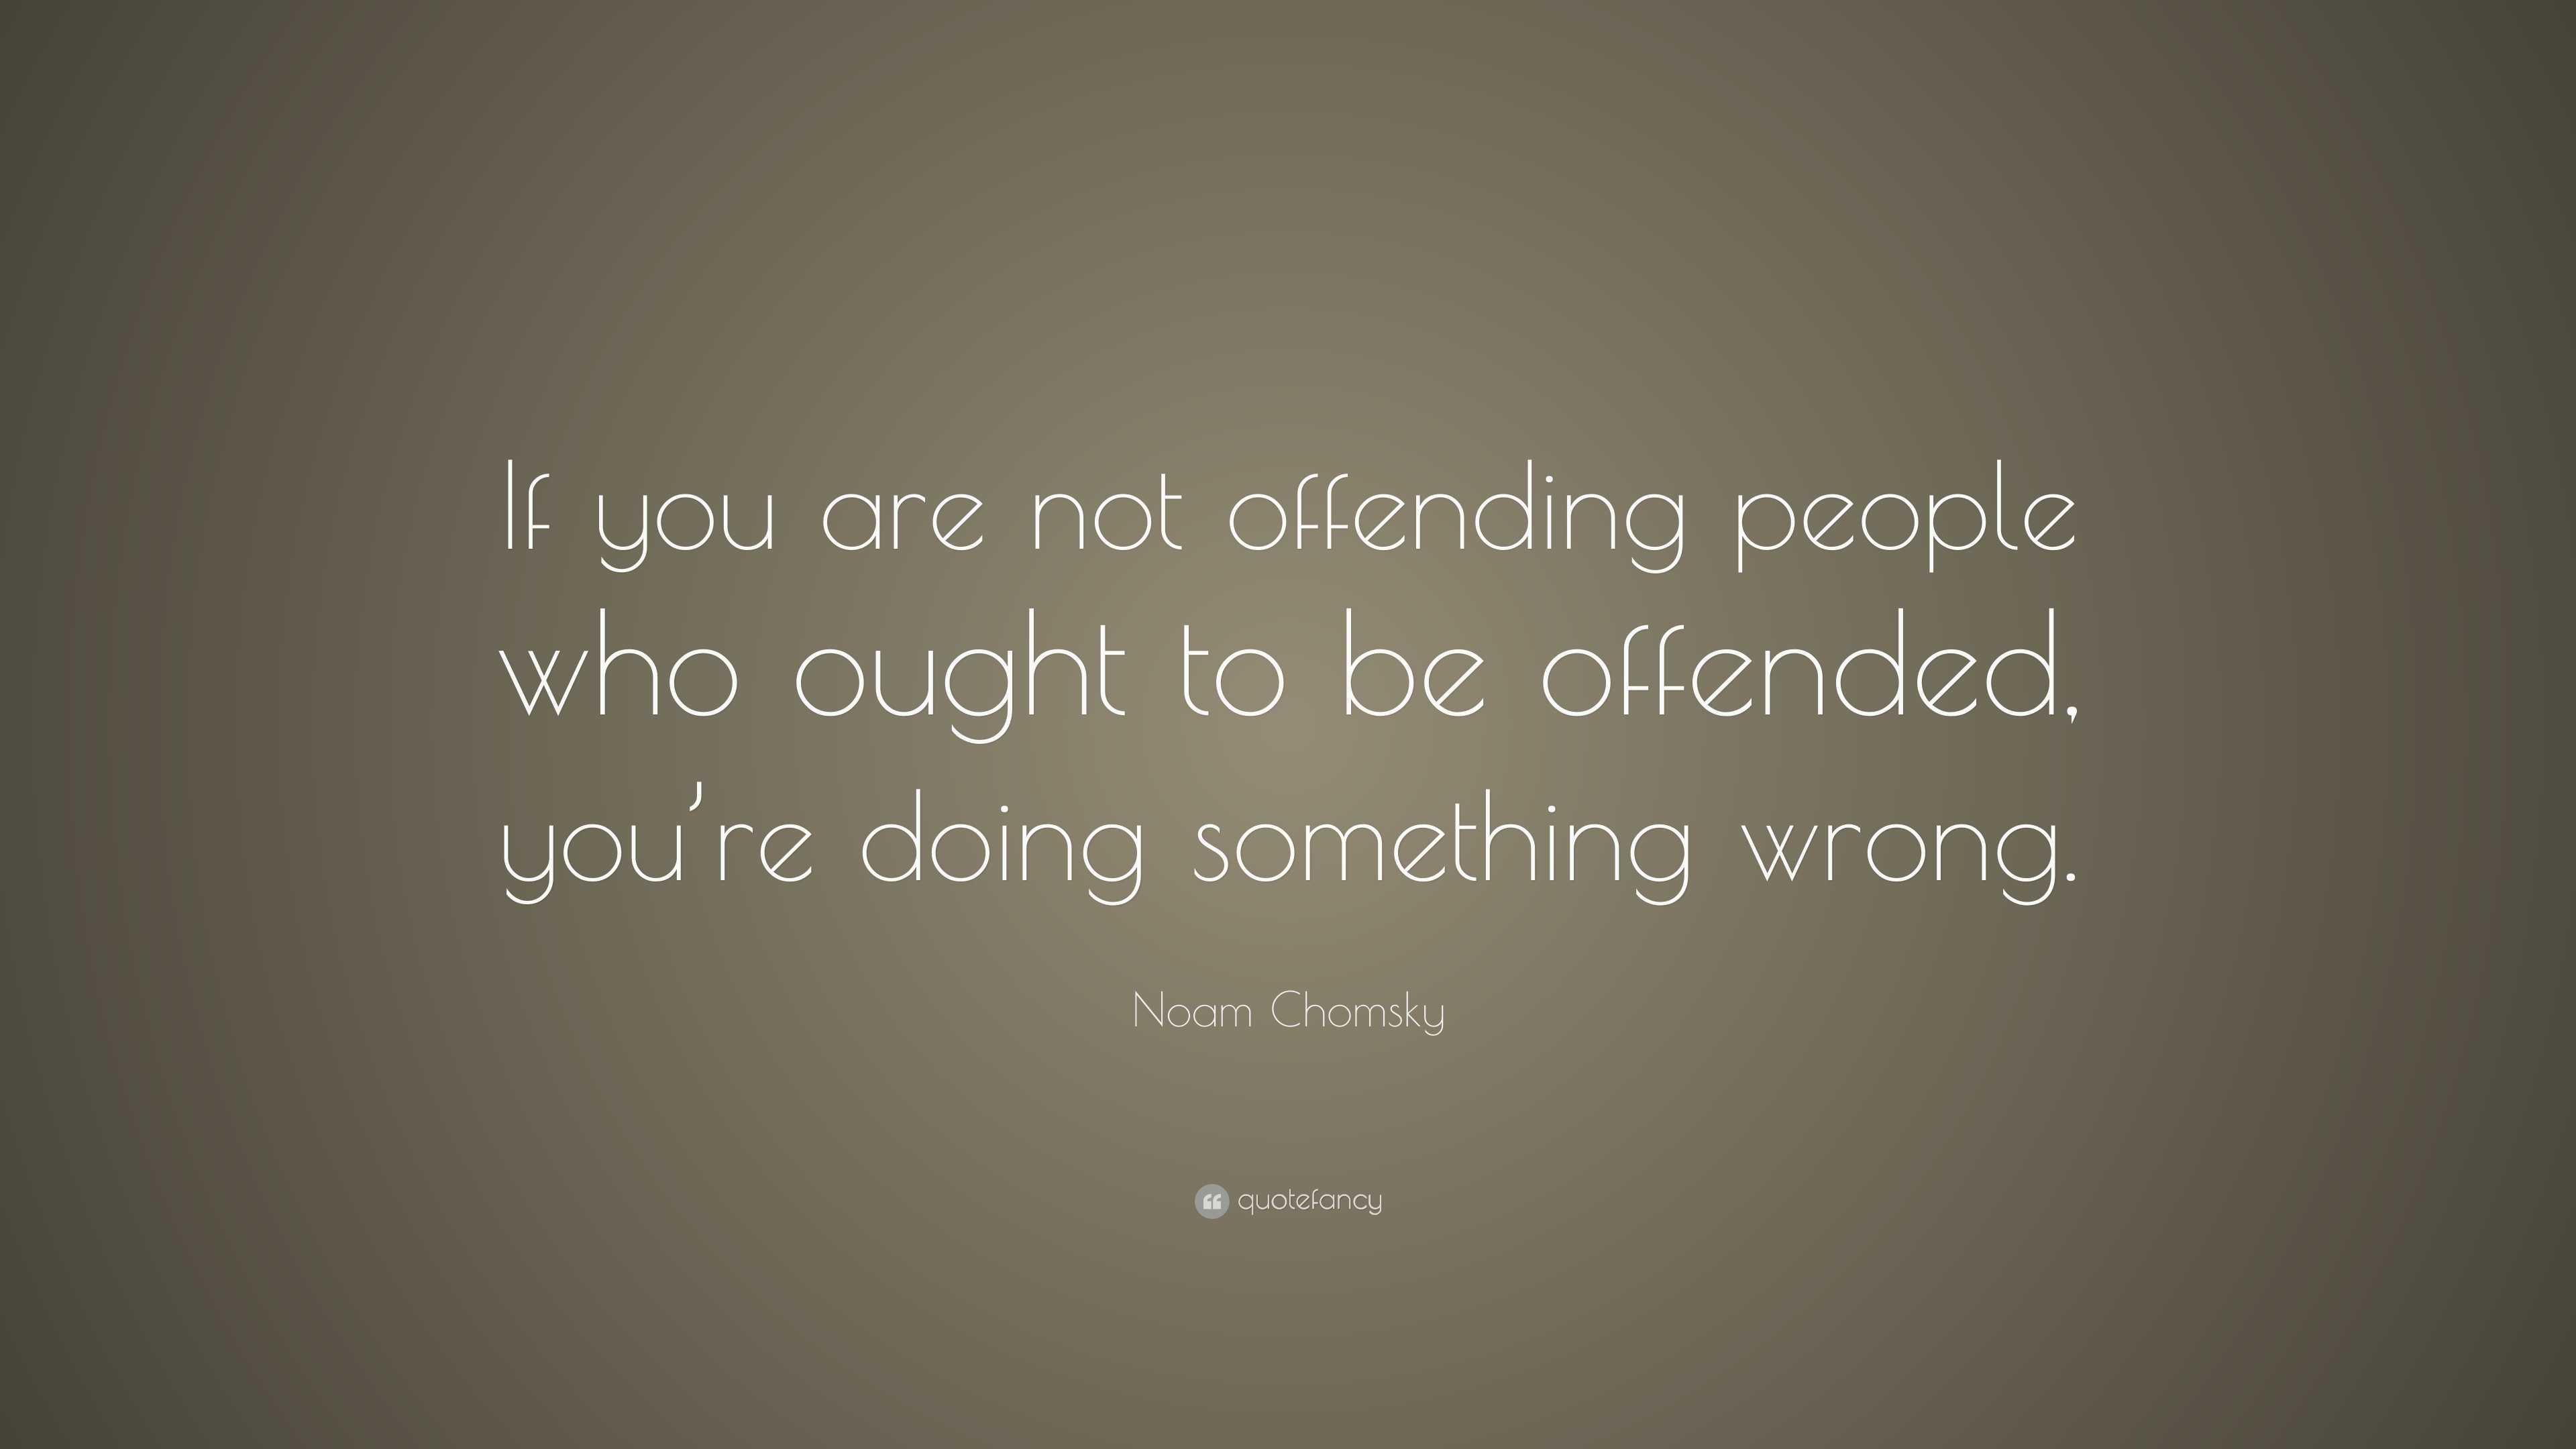 Noam Chomsky Quote “if You Are Not Offending People Who Ought To Be Offended You Re Doing